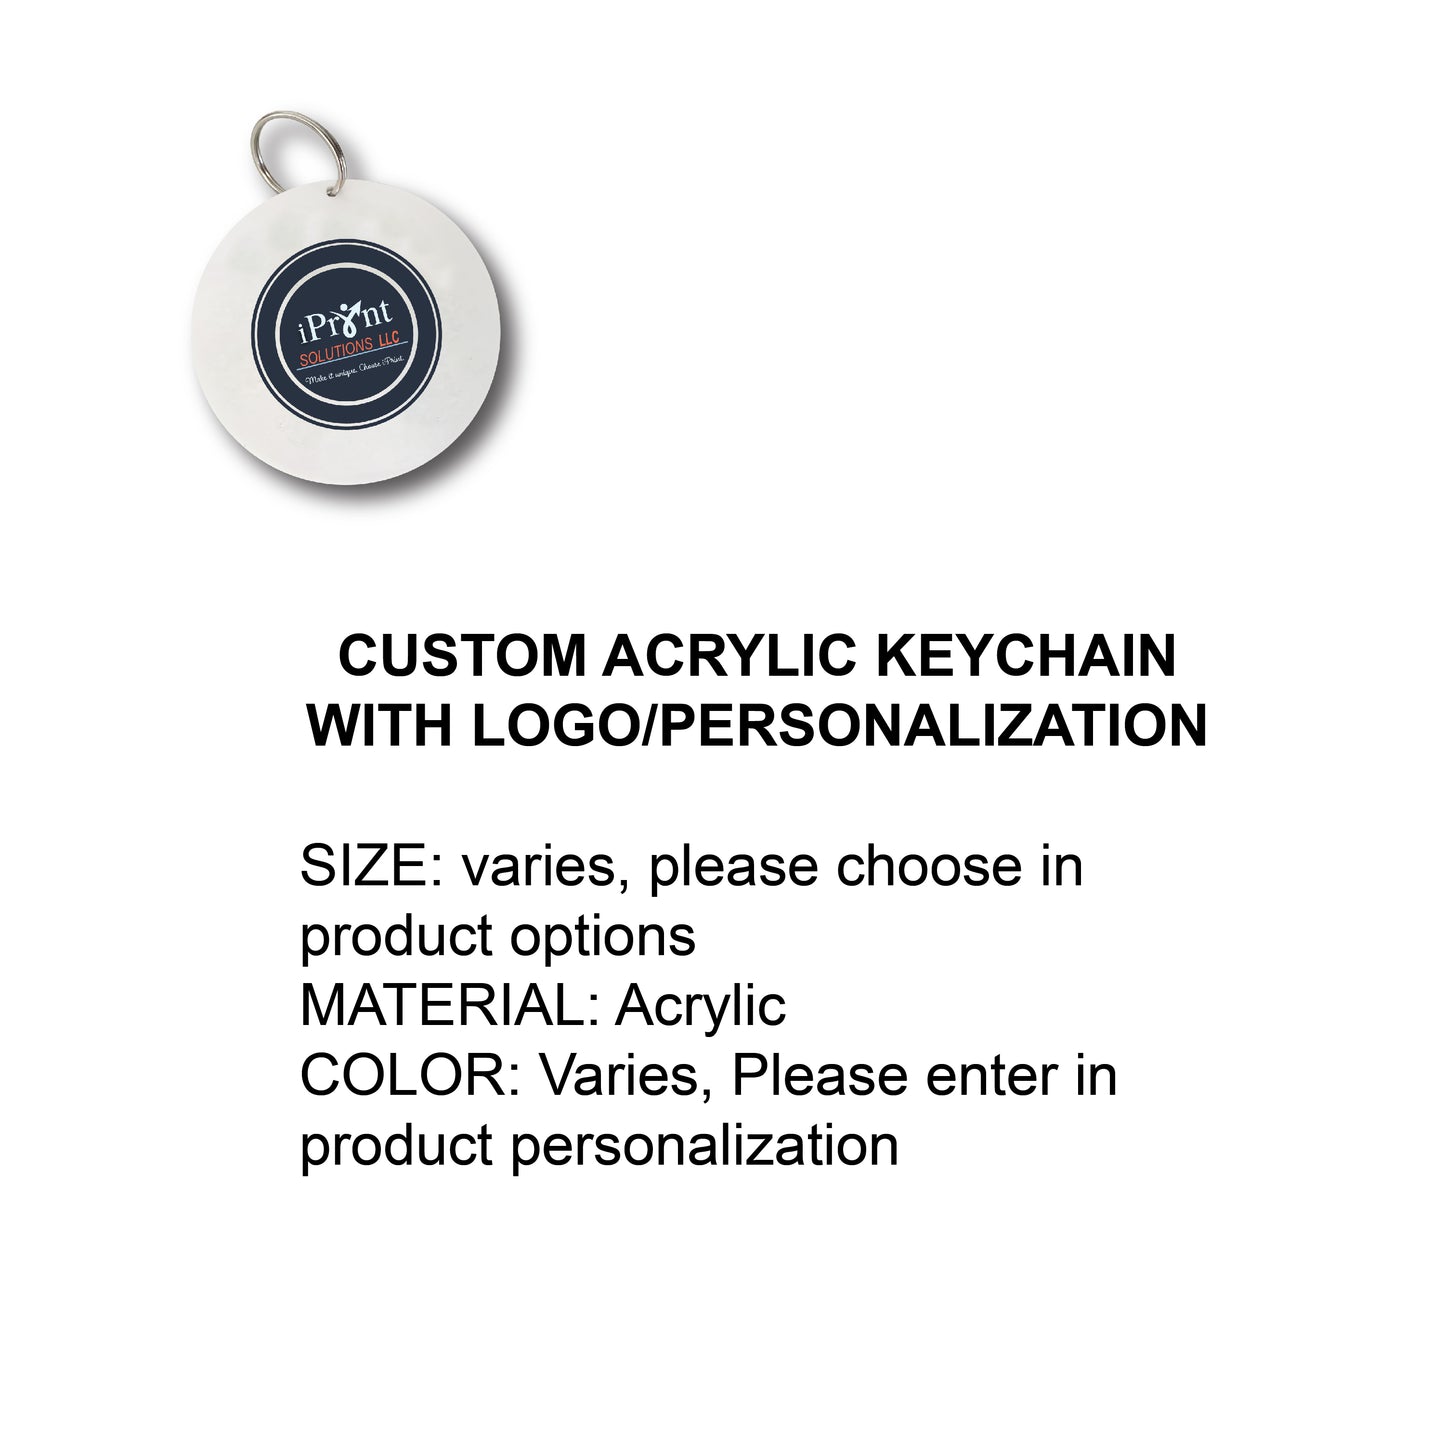 Custom keychain gift, Custom acrylic keychains, Personalized keychains for businesses, Colored acrylic keychains, keychains for marketing